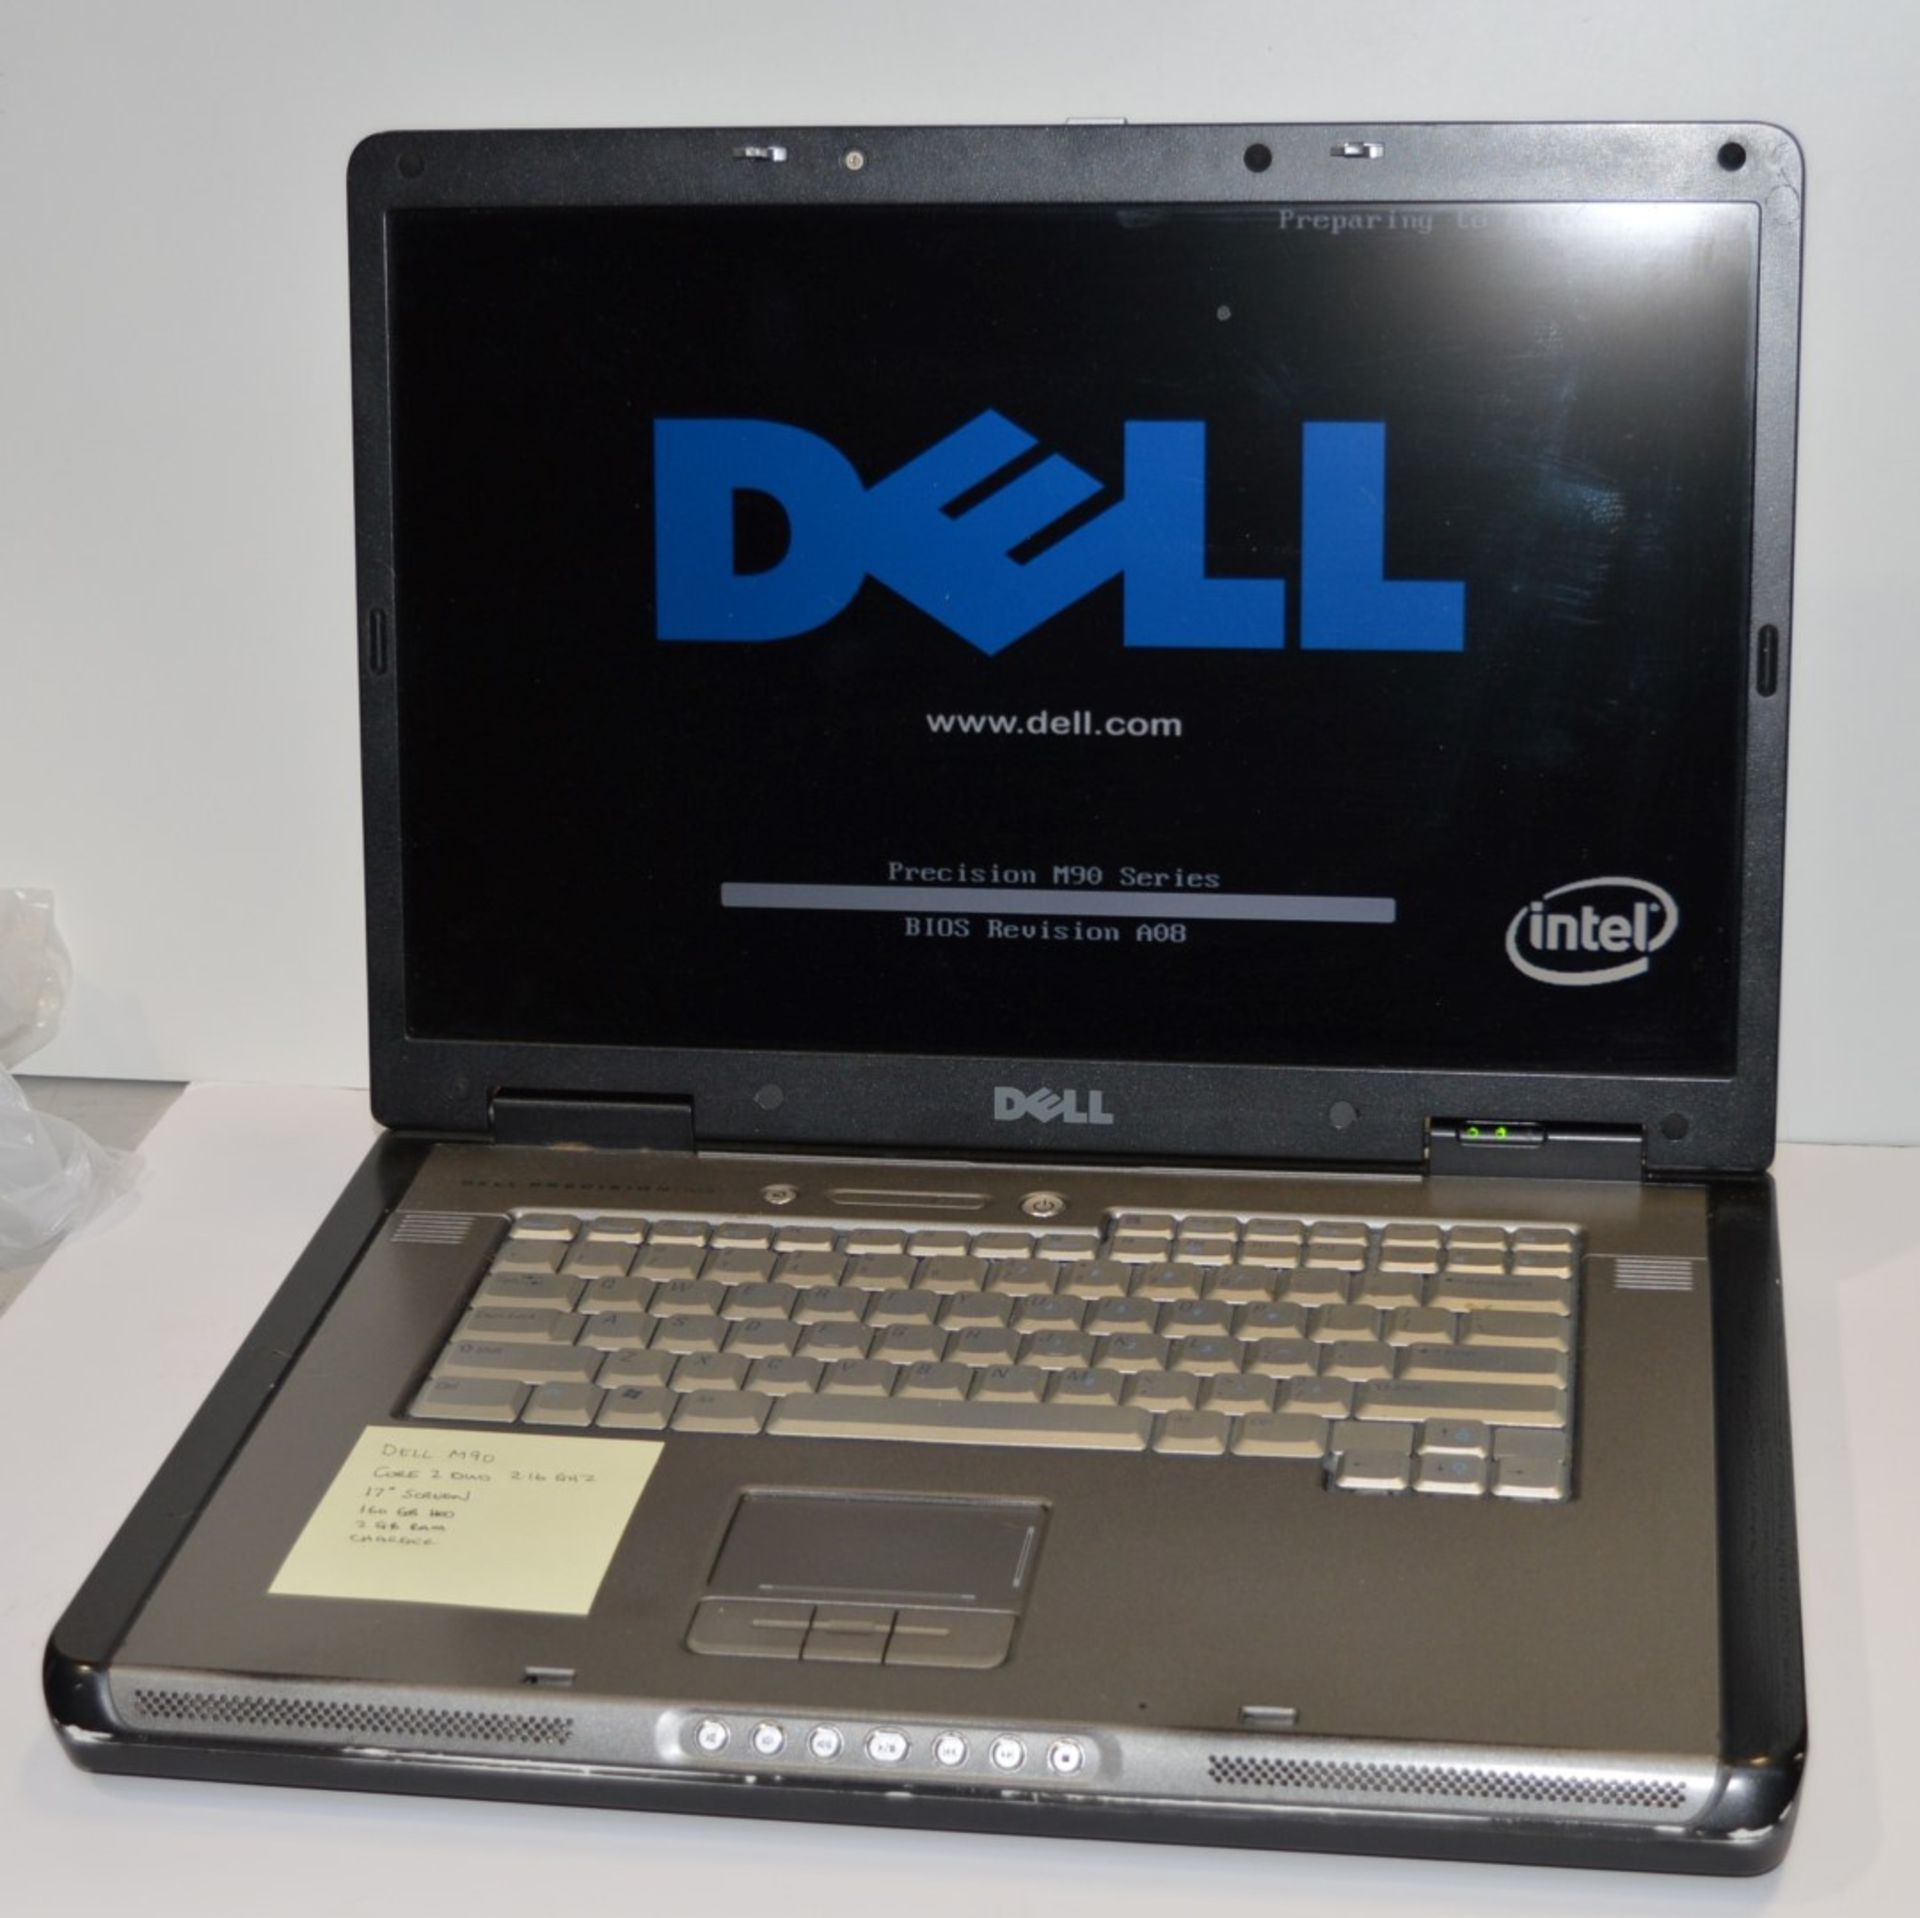 1 x Dell M90 17 Inch Laptop Computer - Features an Intel Core 2 Duo 2.16ghz Processor, 160gb Hard